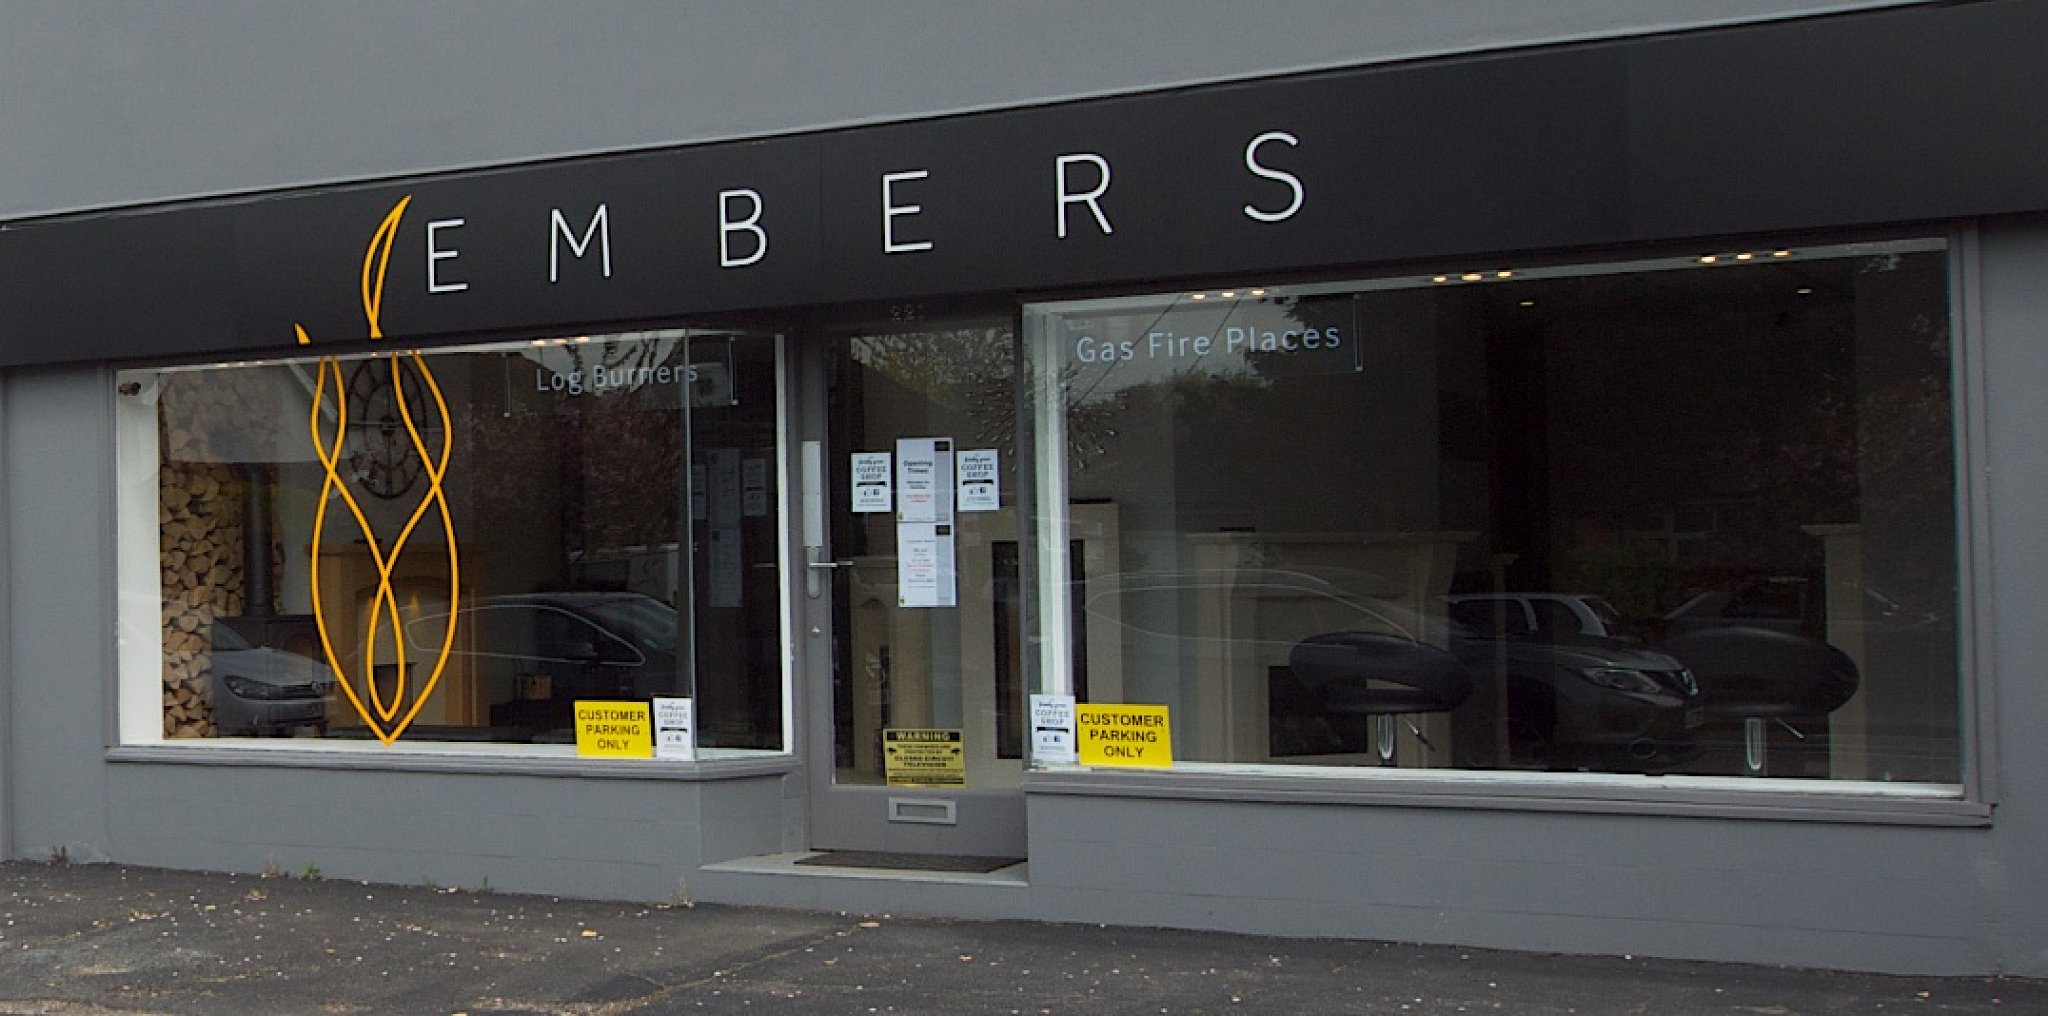 Embers Fireplace showroom in Frimley Green, near Camberley, Surrey